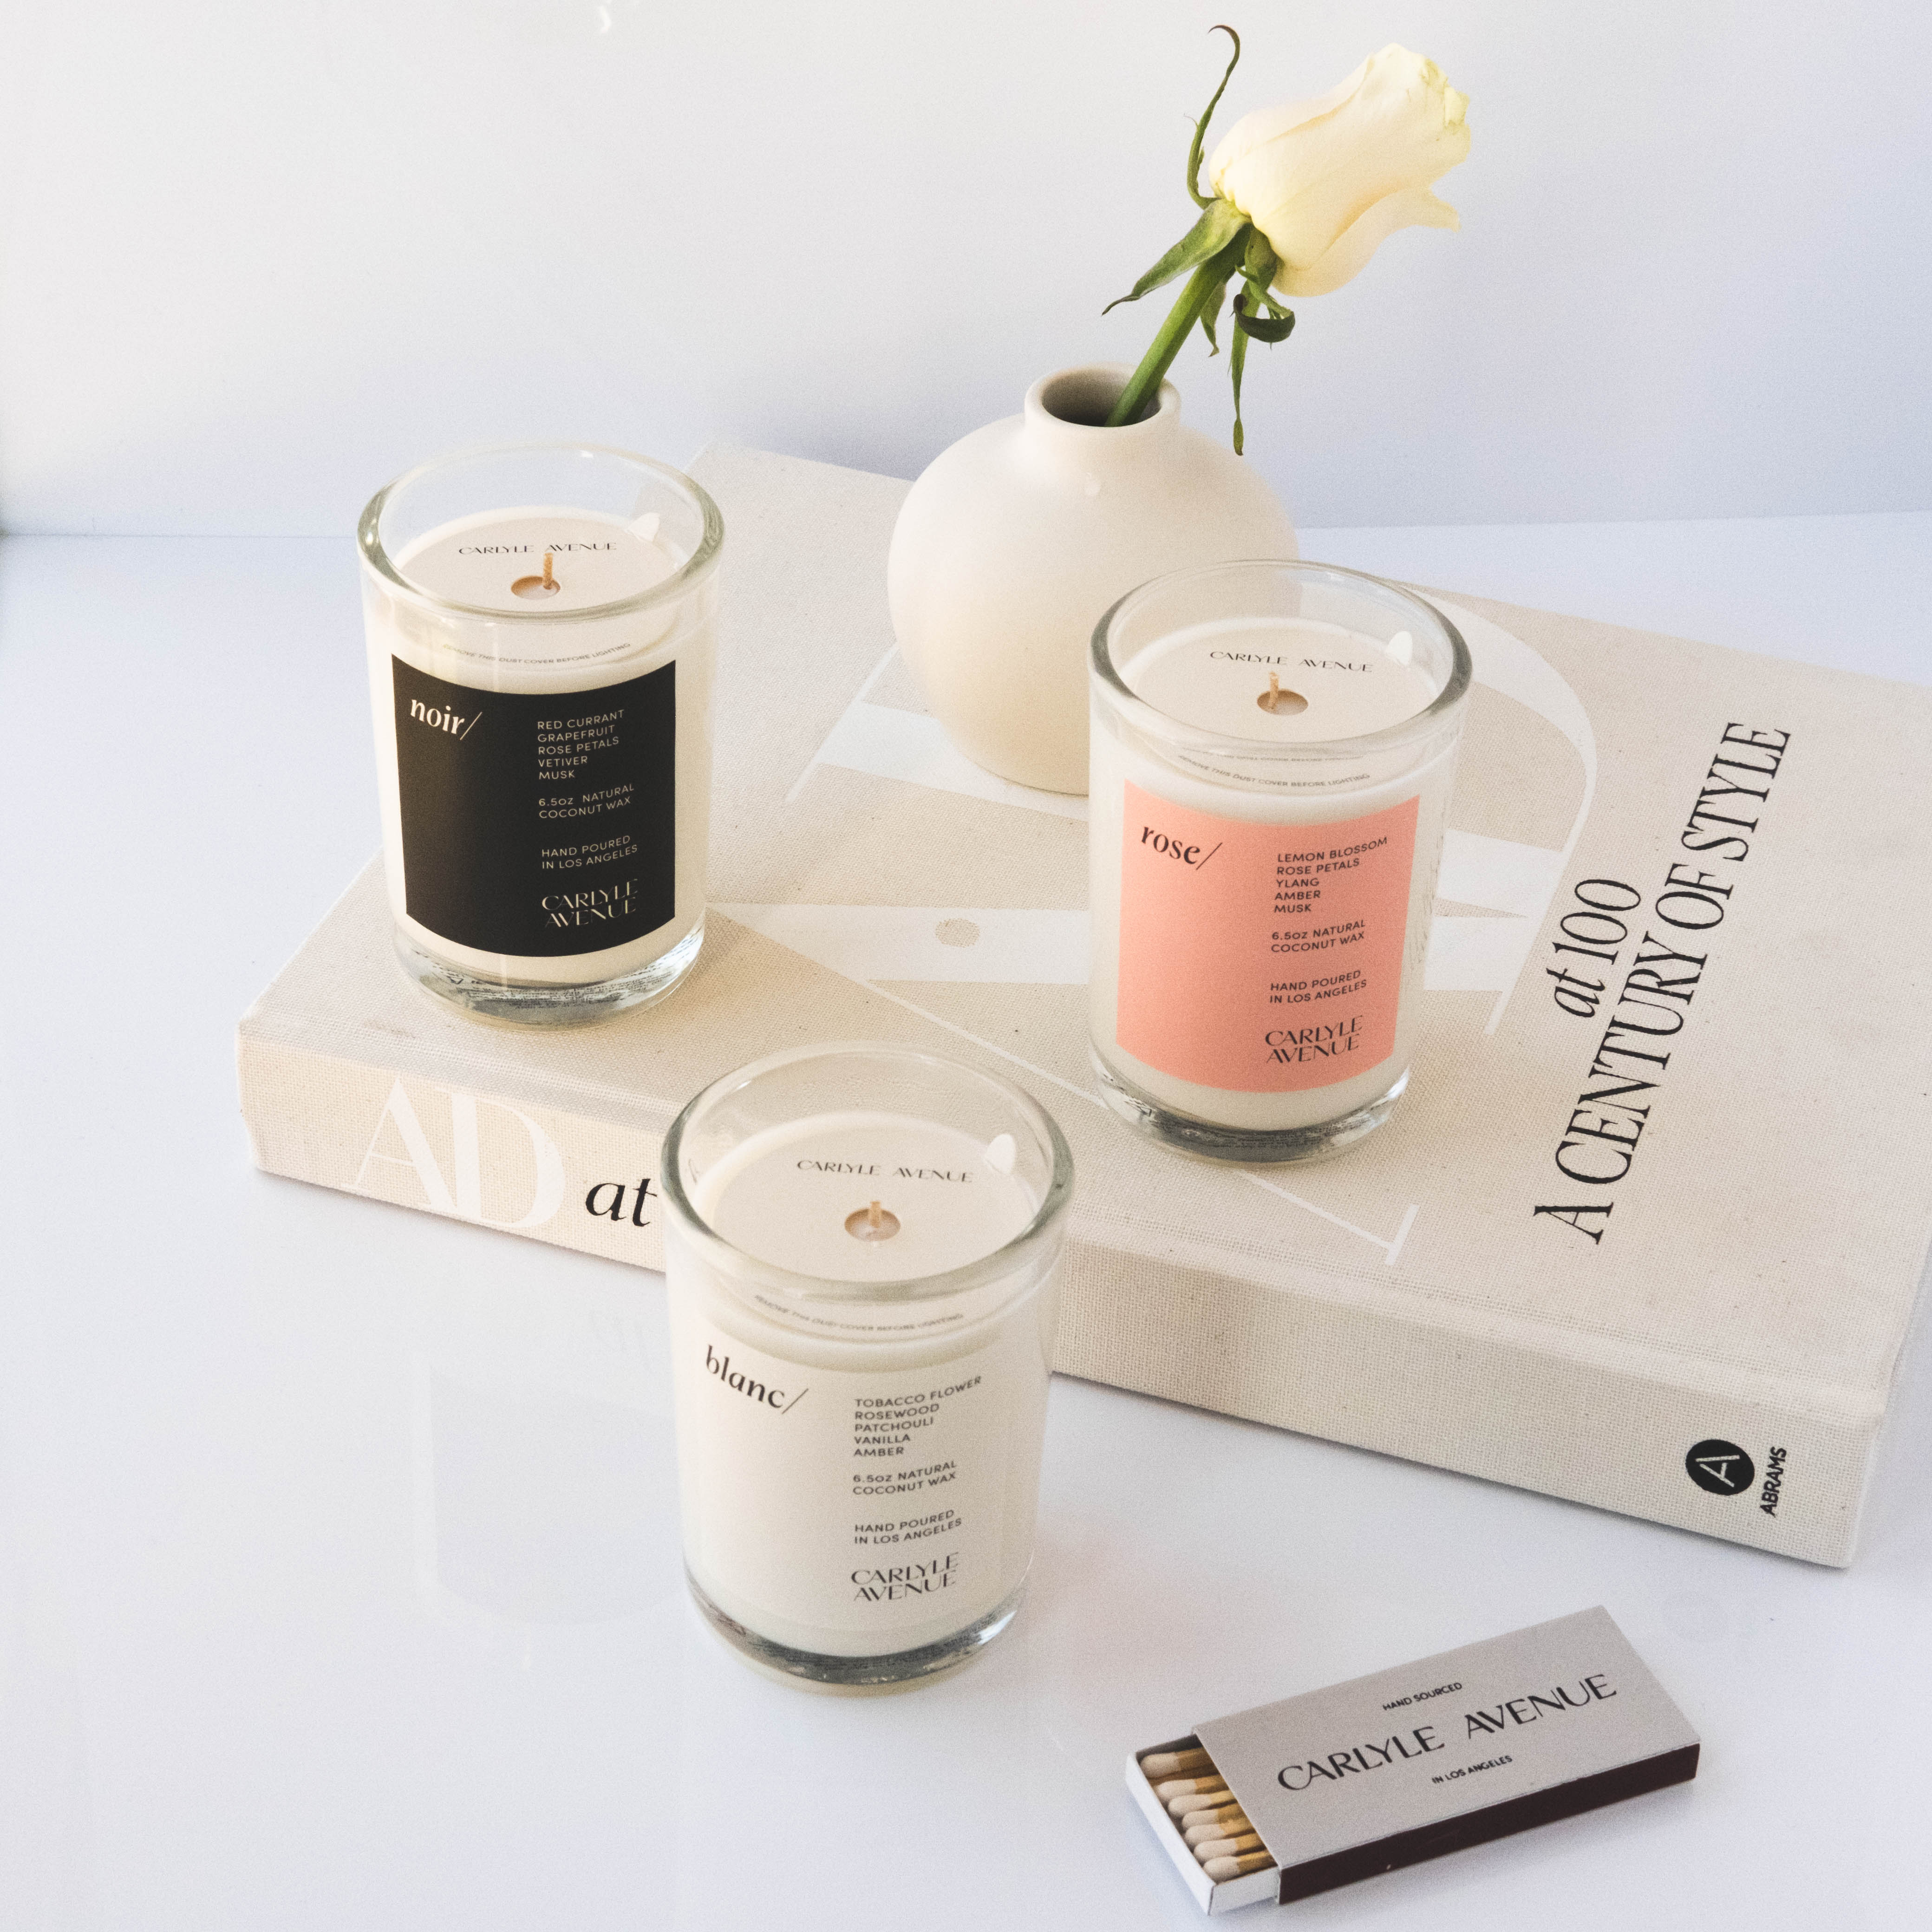 Carlyle Avenue Scented Candle - Rose